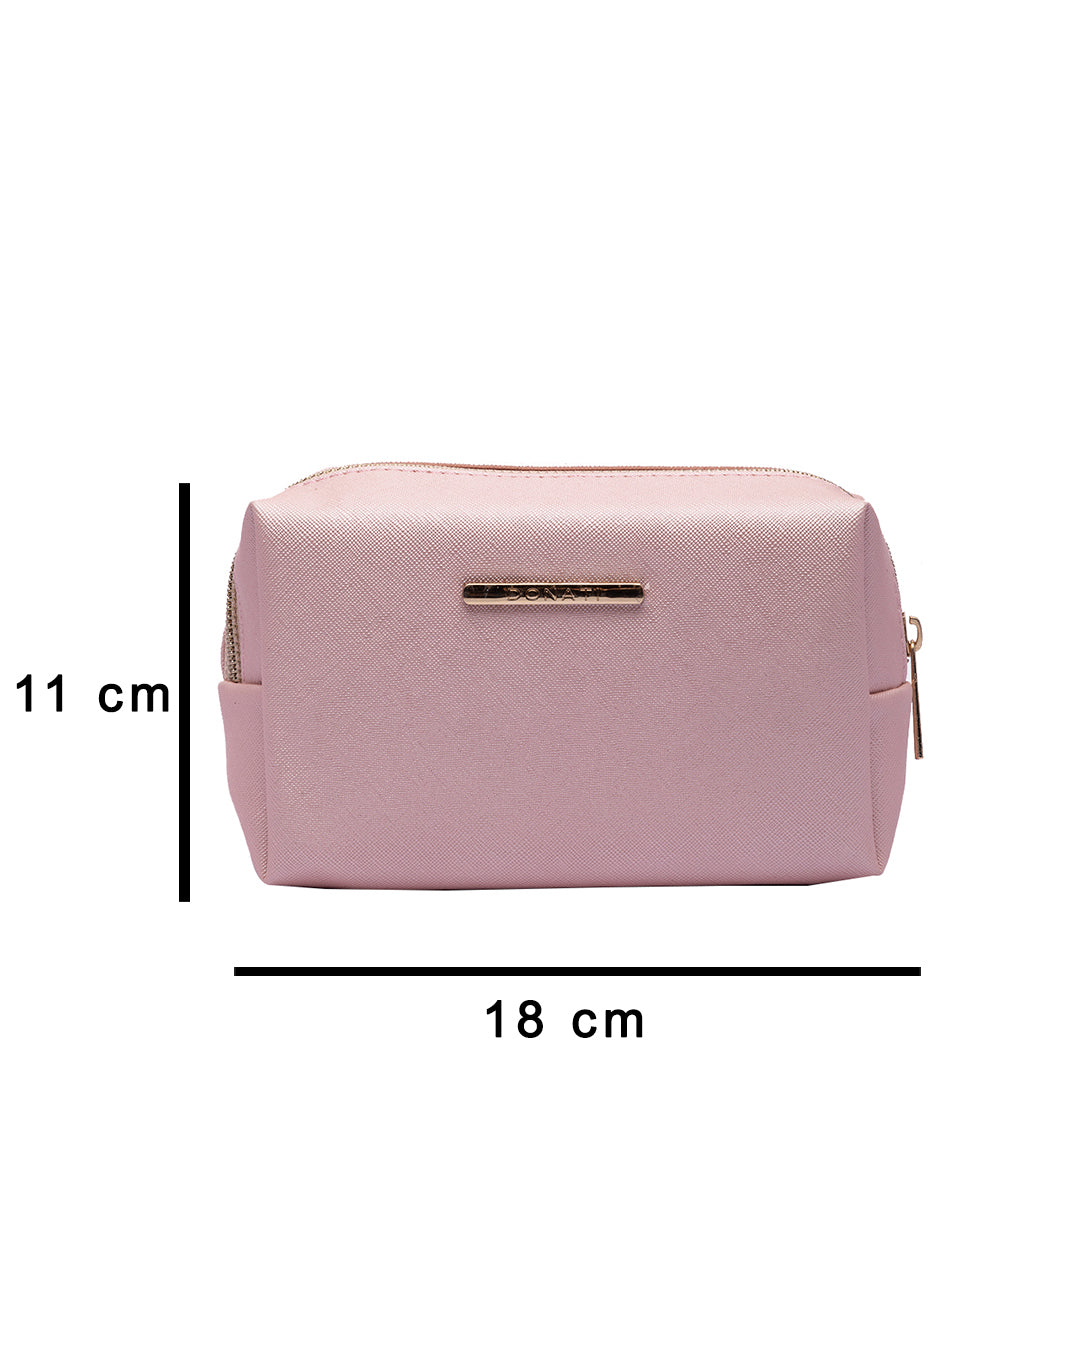 VON CASA Cosmetic Bag, for Home & Travel, Pink, Rexine